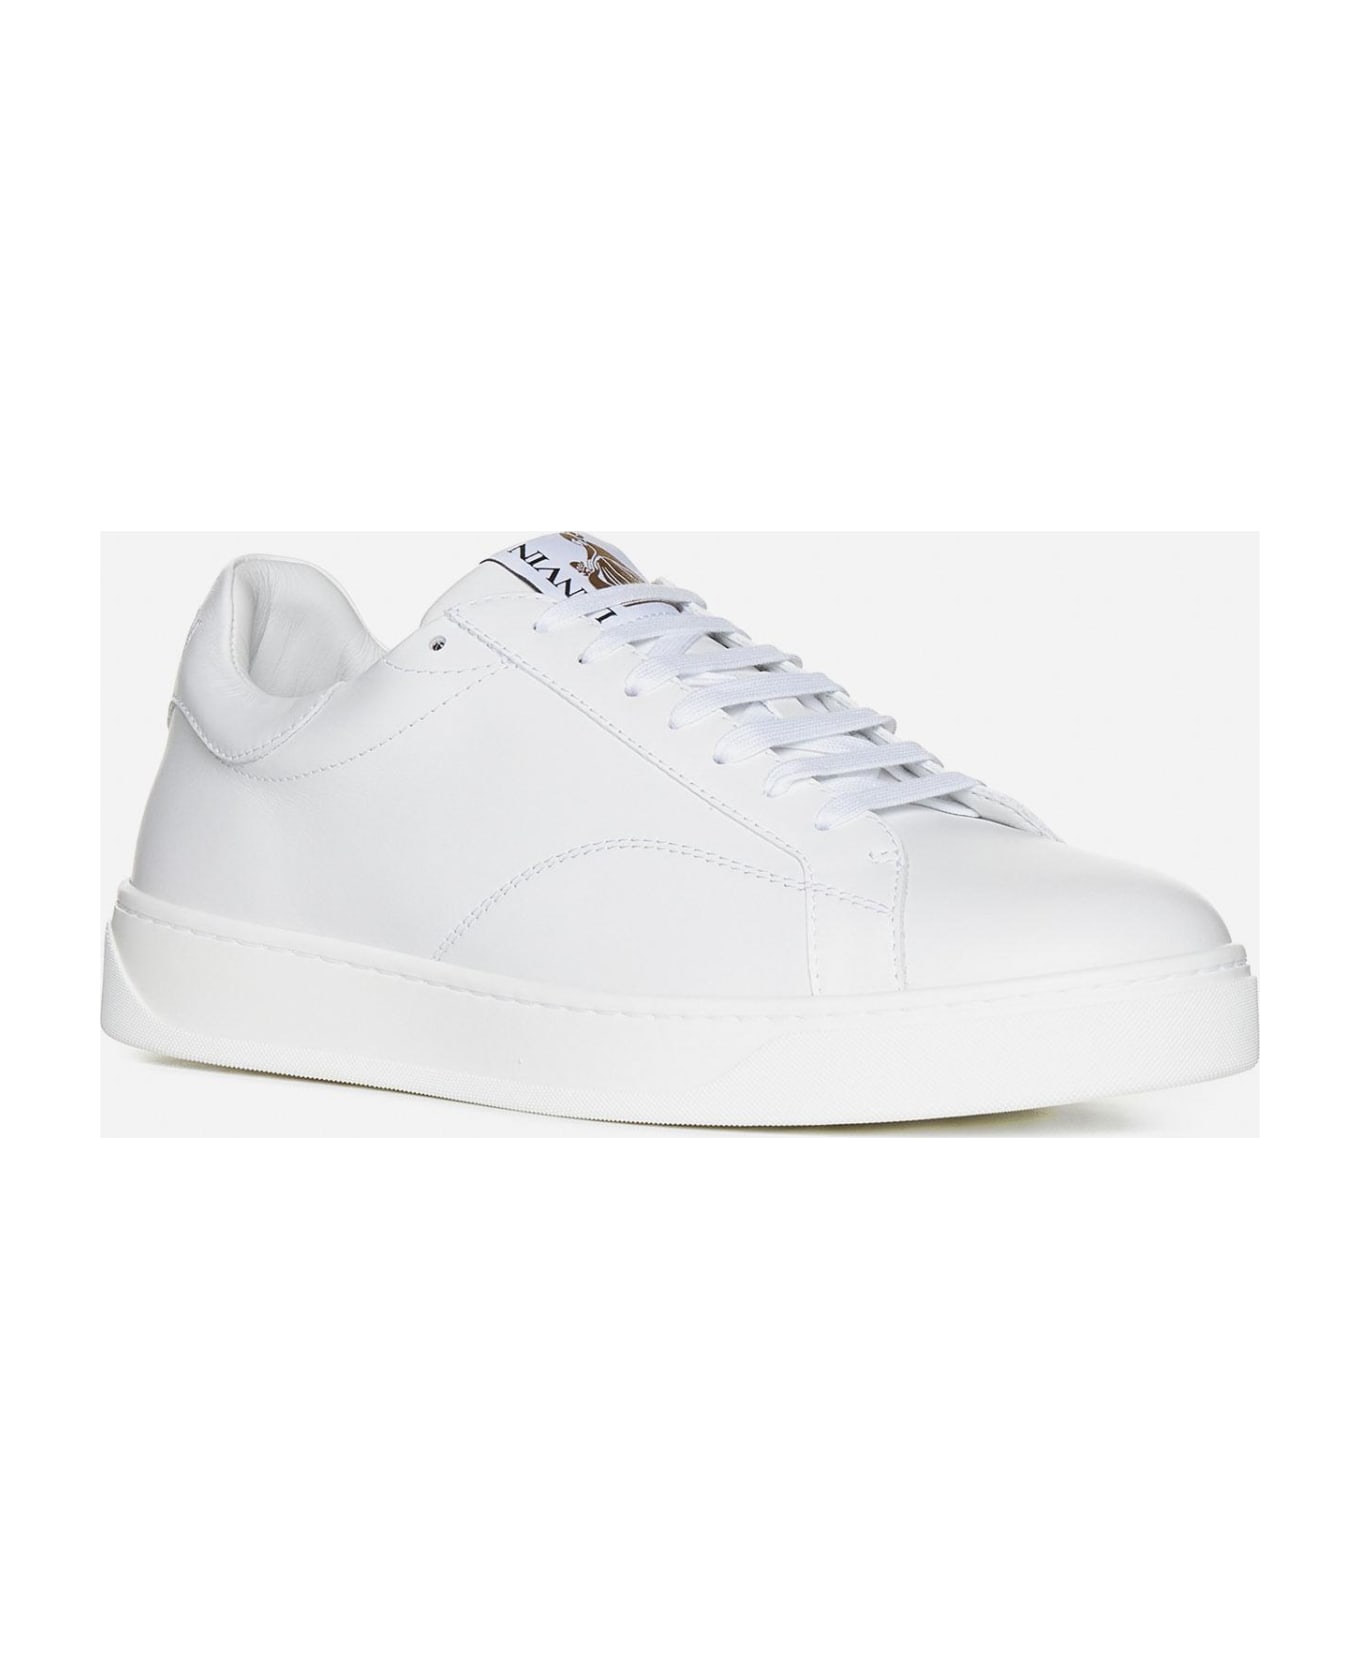 Lanvin Ddb0 Leather Sneakers - White/white スニーカー